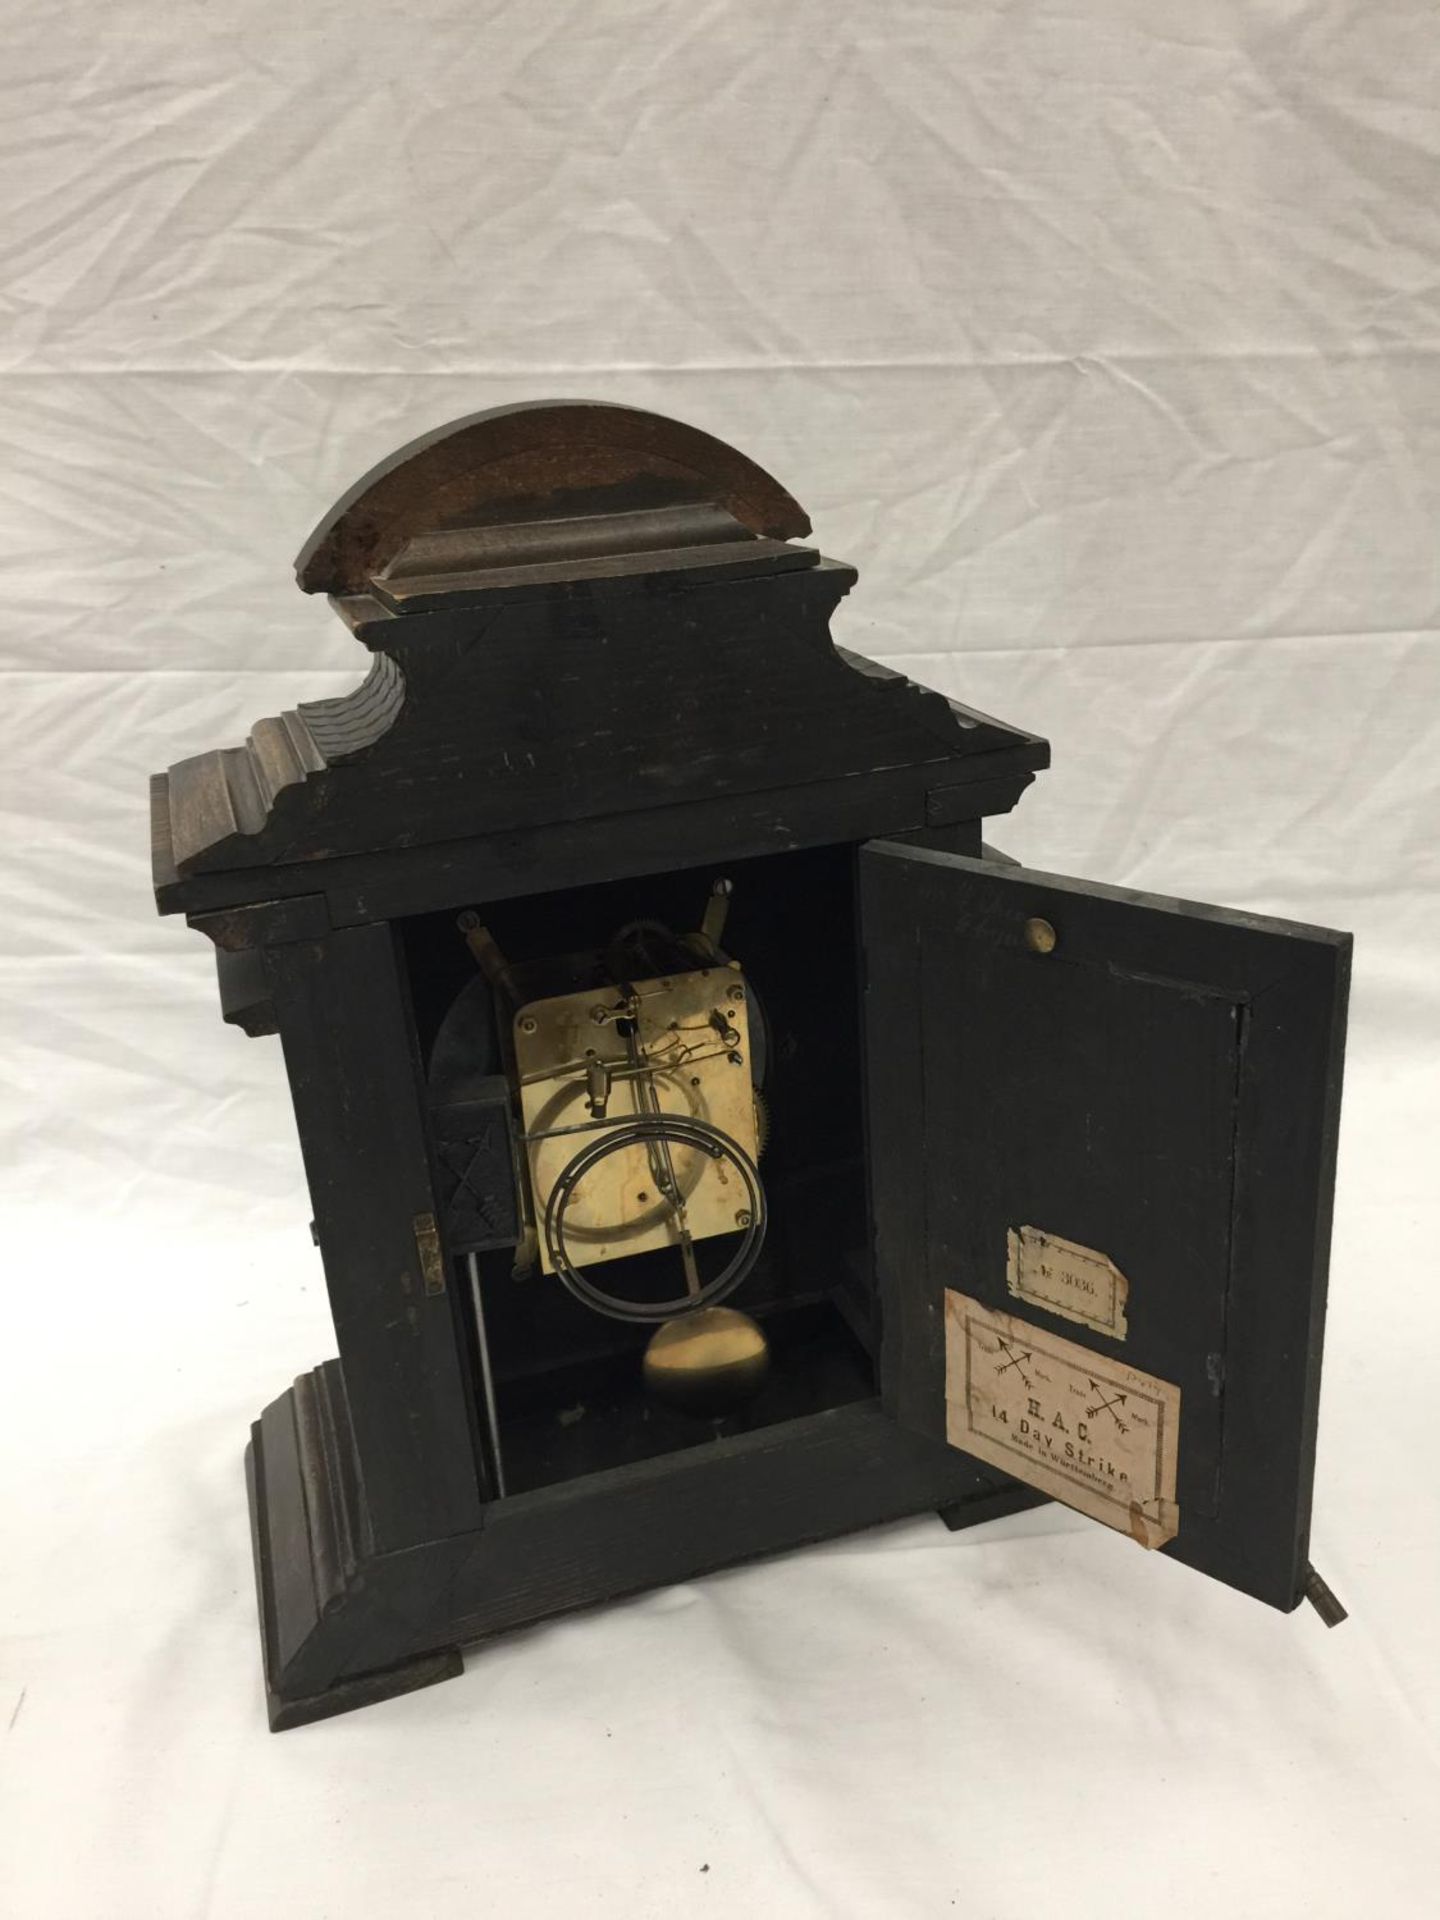 AN ORNATE CHIMING MANTLE CLOCK WITH GERMAN MOVEMENT AND PENDULUM. KEY IS PRESENT AND WORKING AT TIME - Image 7 of 11